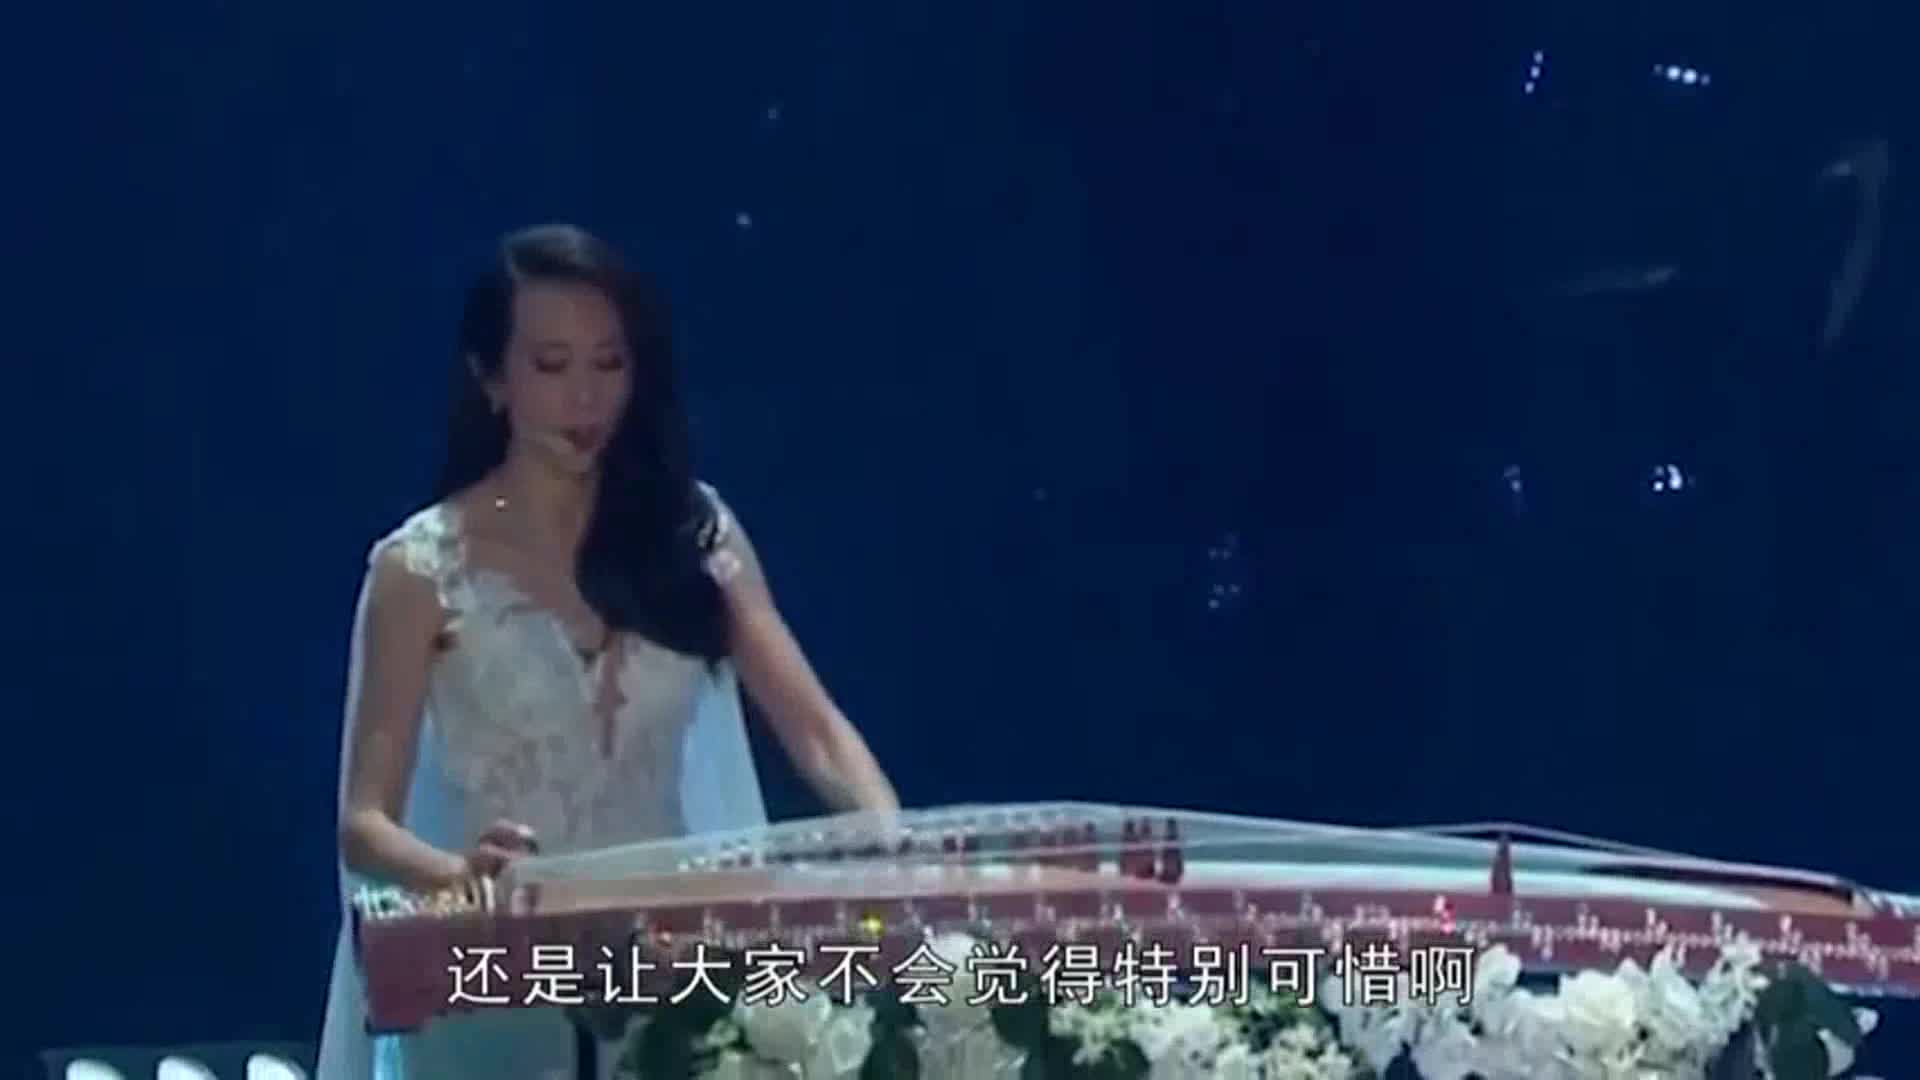 Why is Mo Wenwei so attractive with her voice and calm temperament?